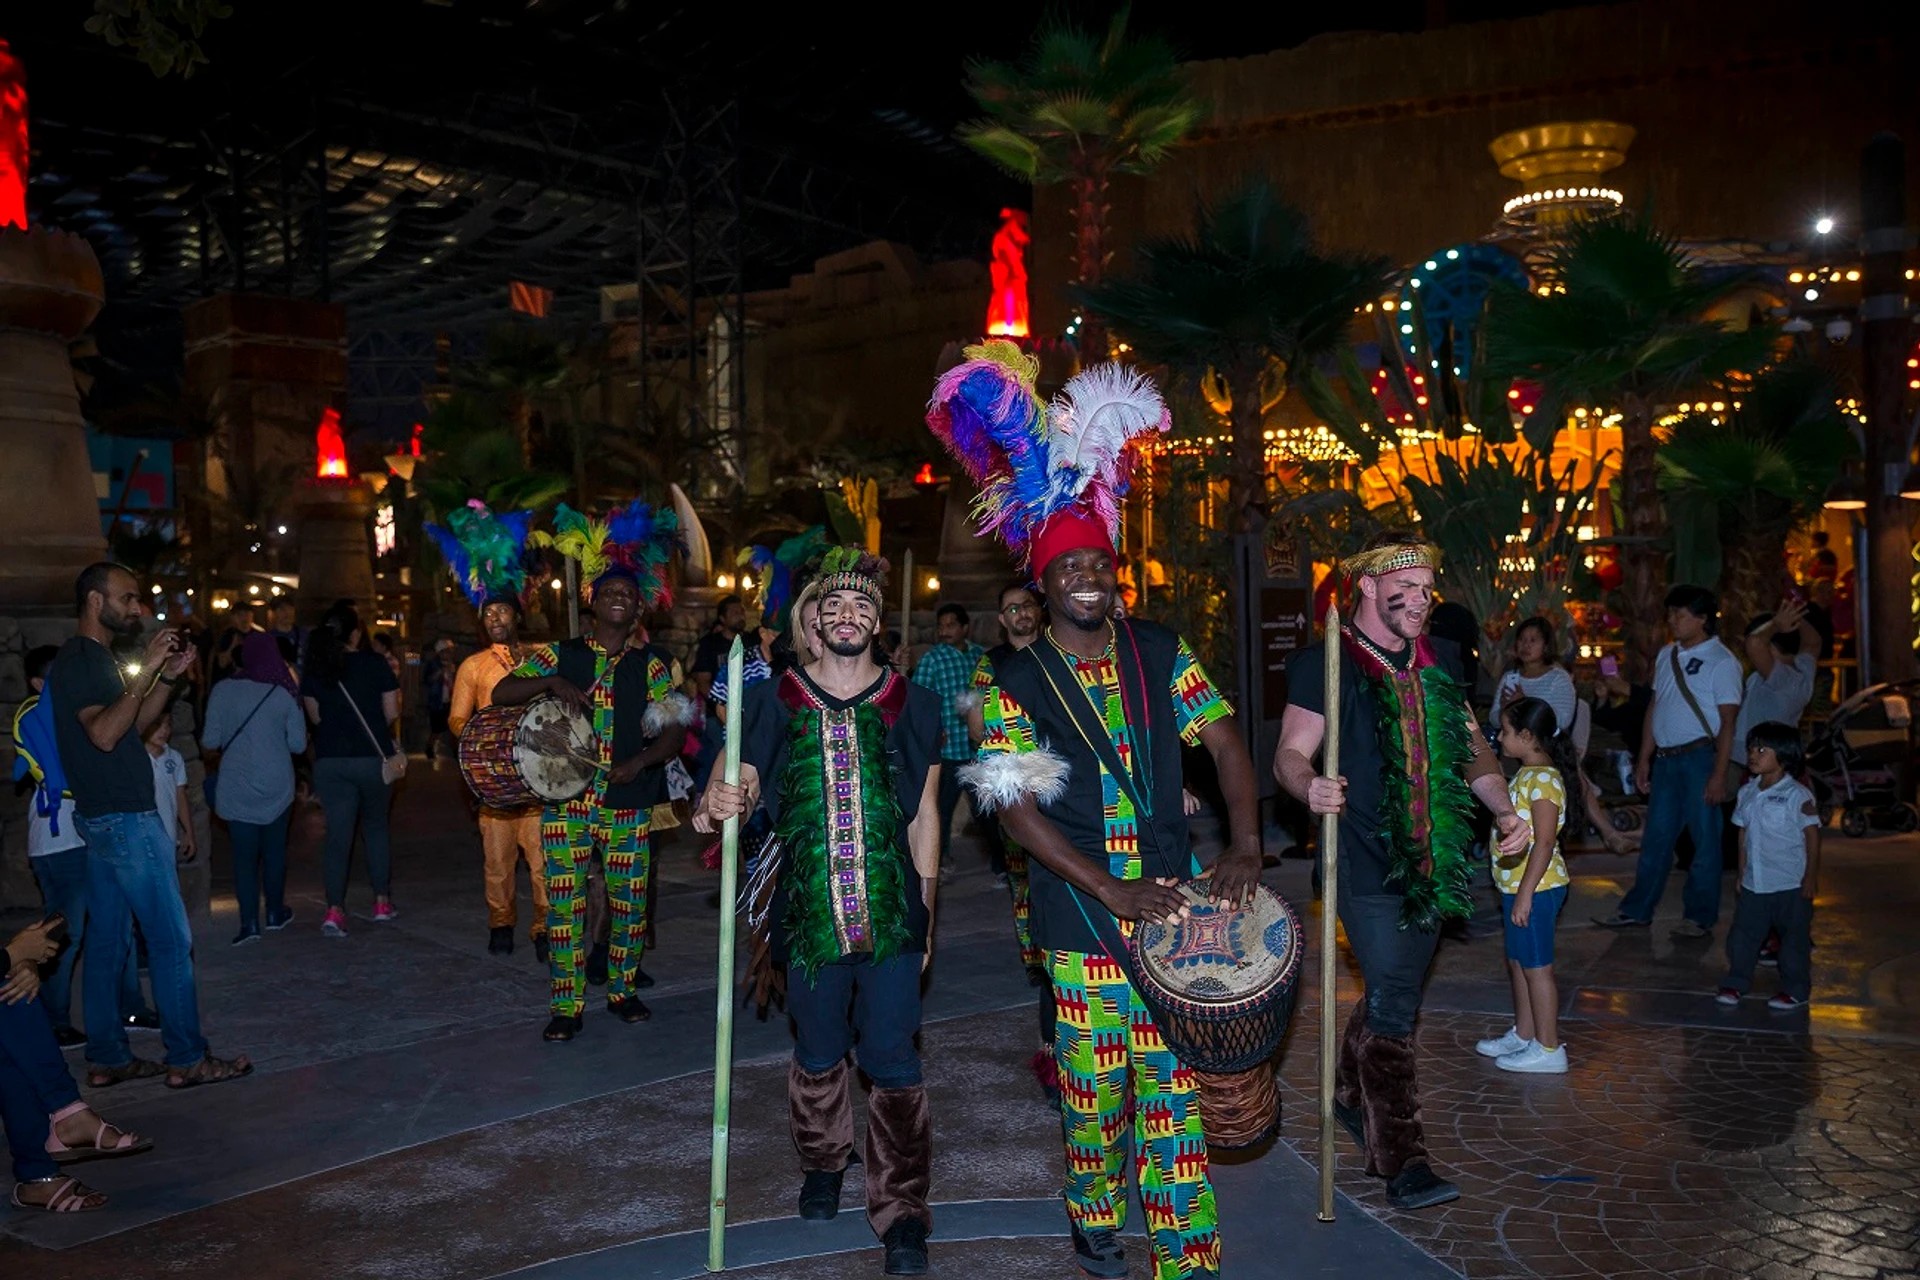 IMG Worlds of Adventure Launches IMG Worlds Summer Carnival in partnership with Dubai Summer Surprises